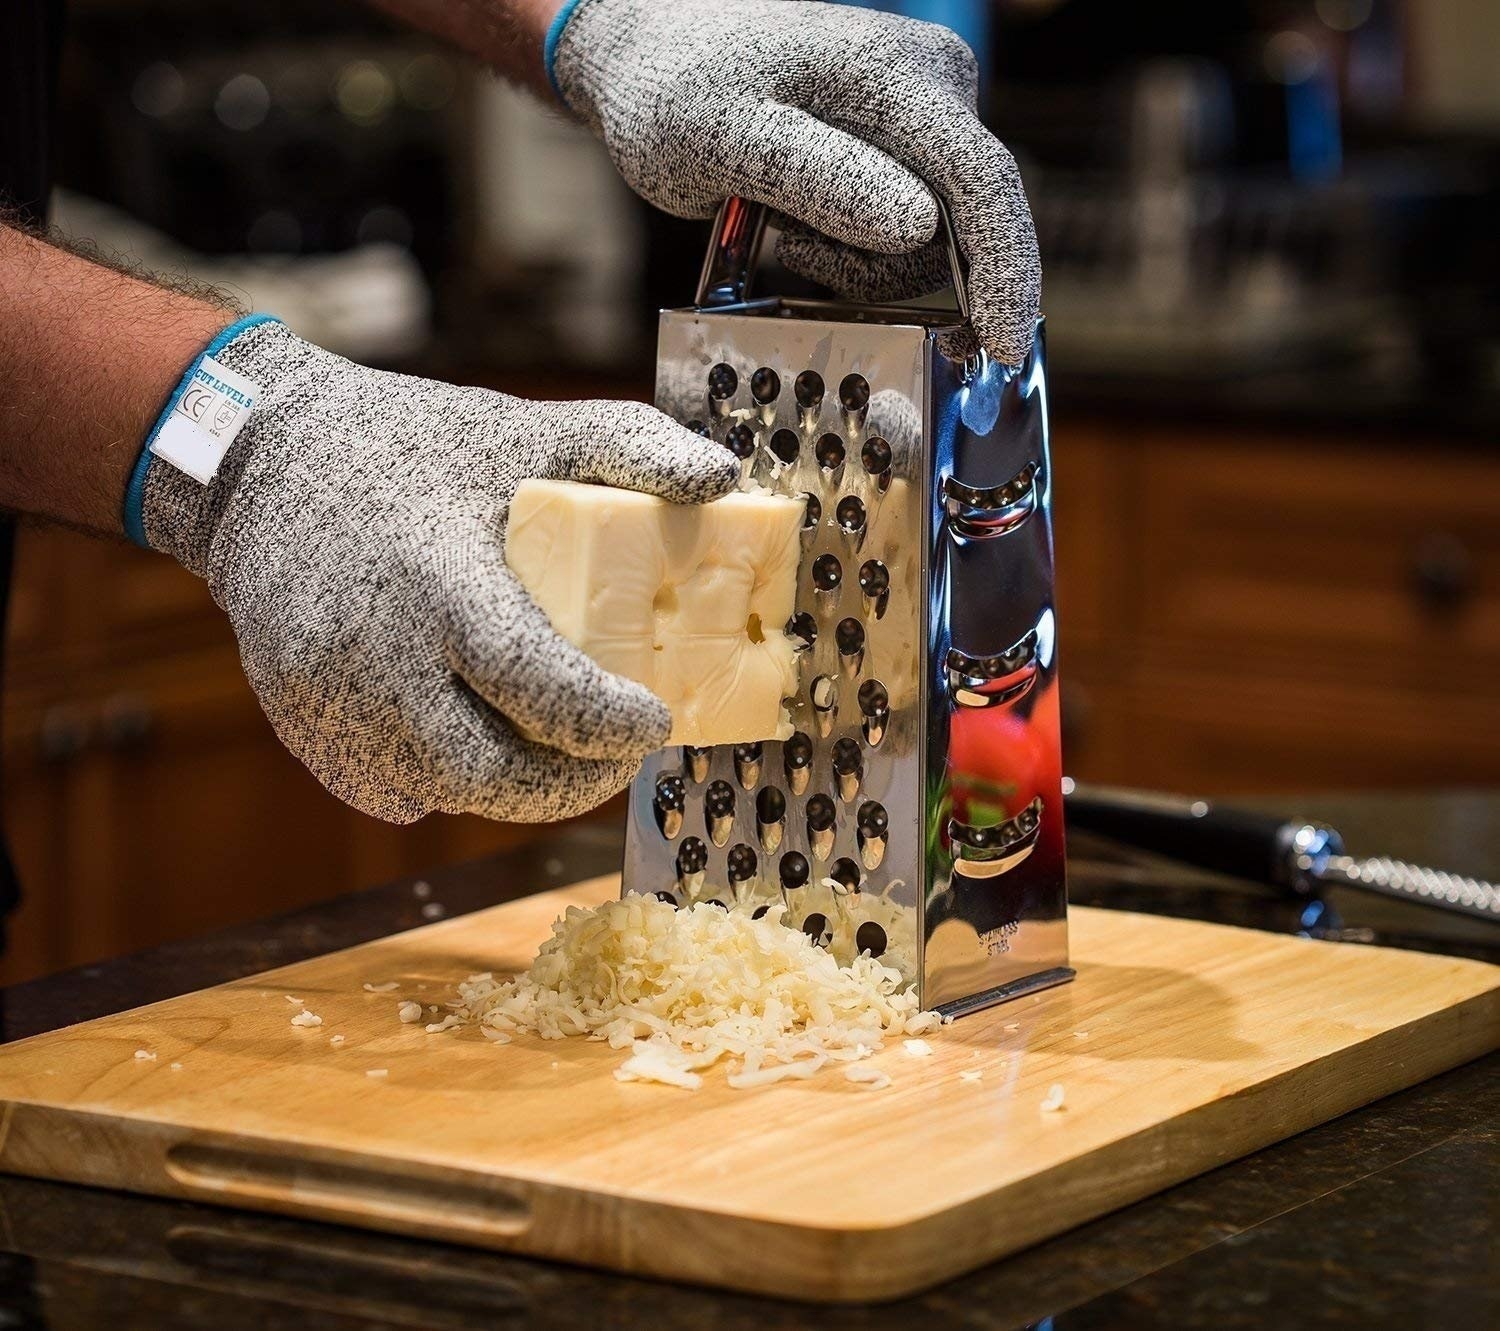 A hand grating cheese with the anti-cut gloves on